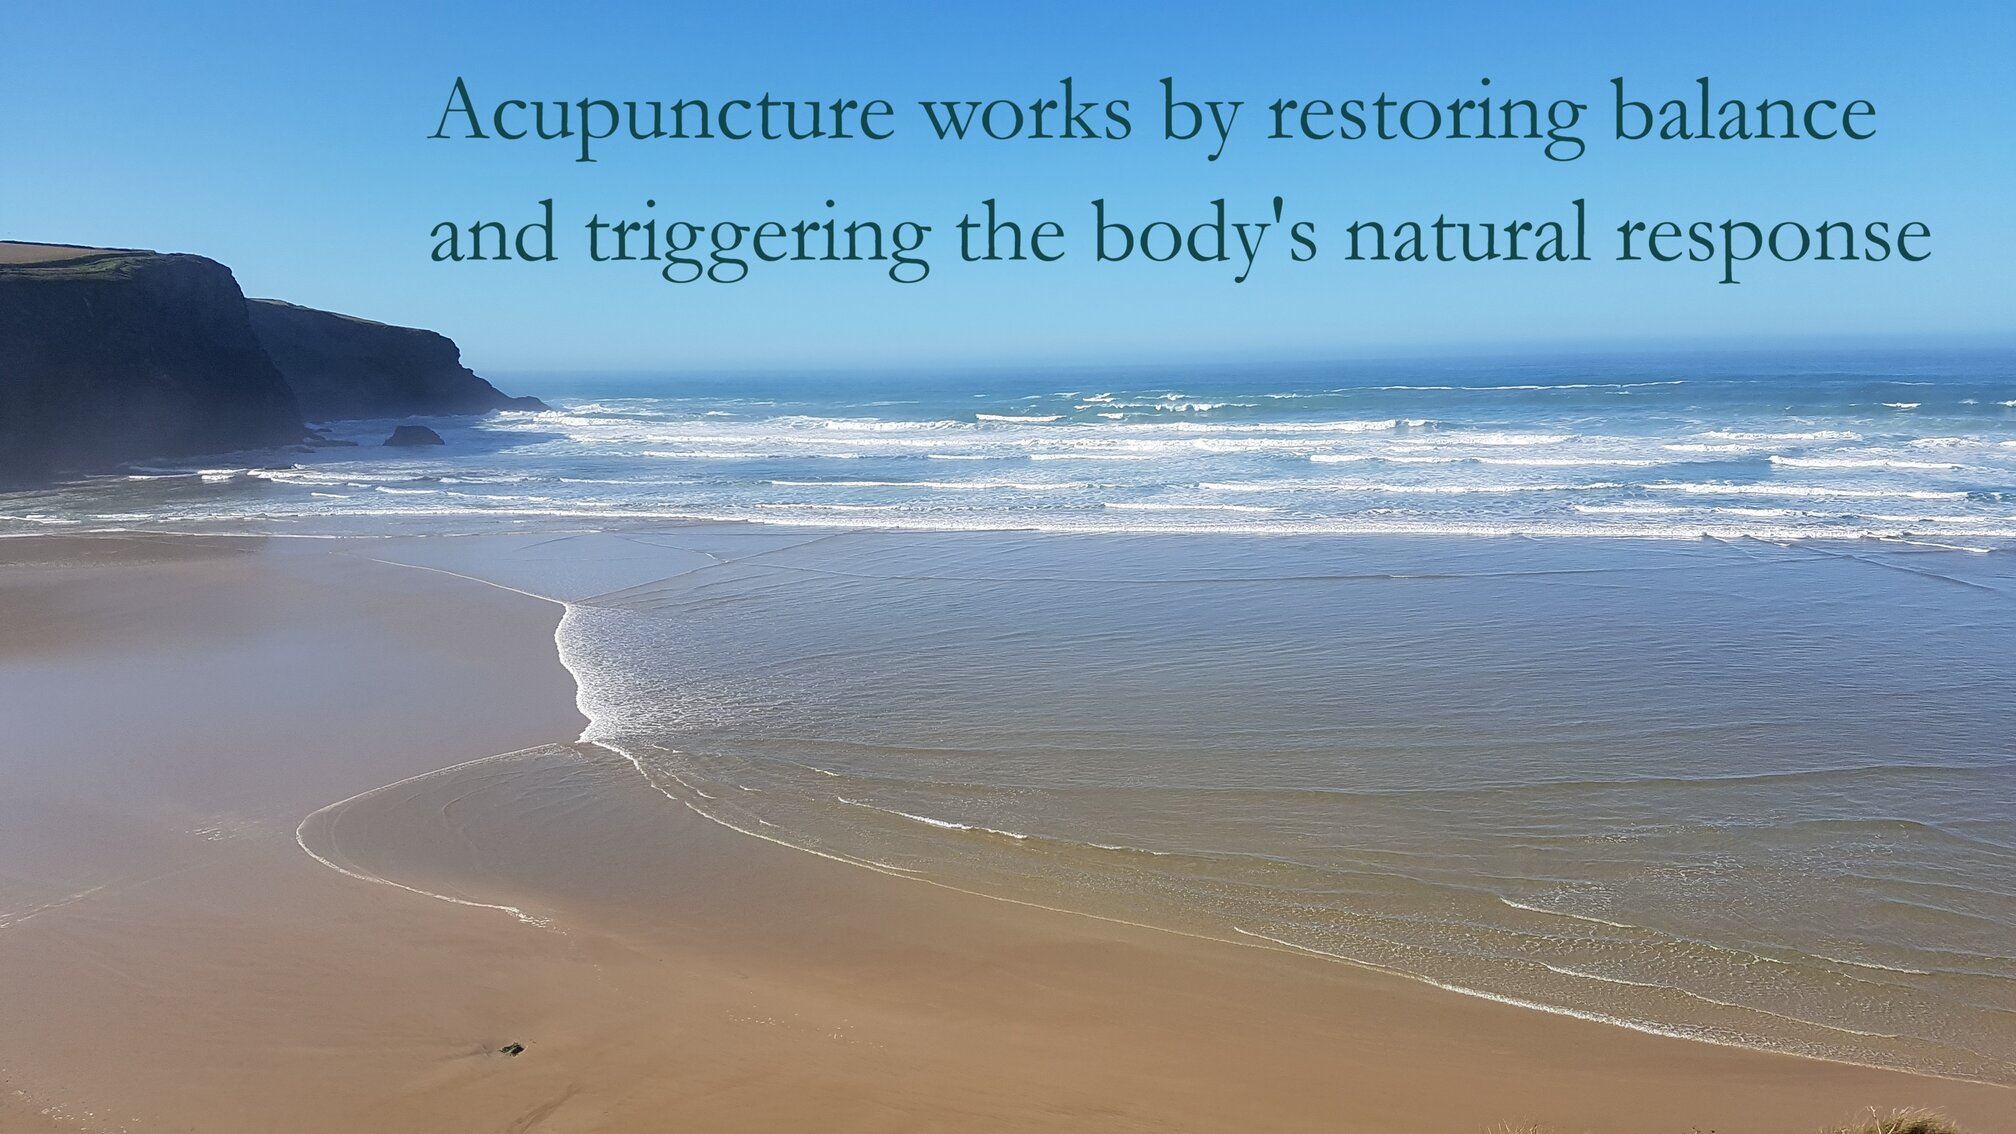 Acupuncture works by restoring balance and triggering the body's natural response.